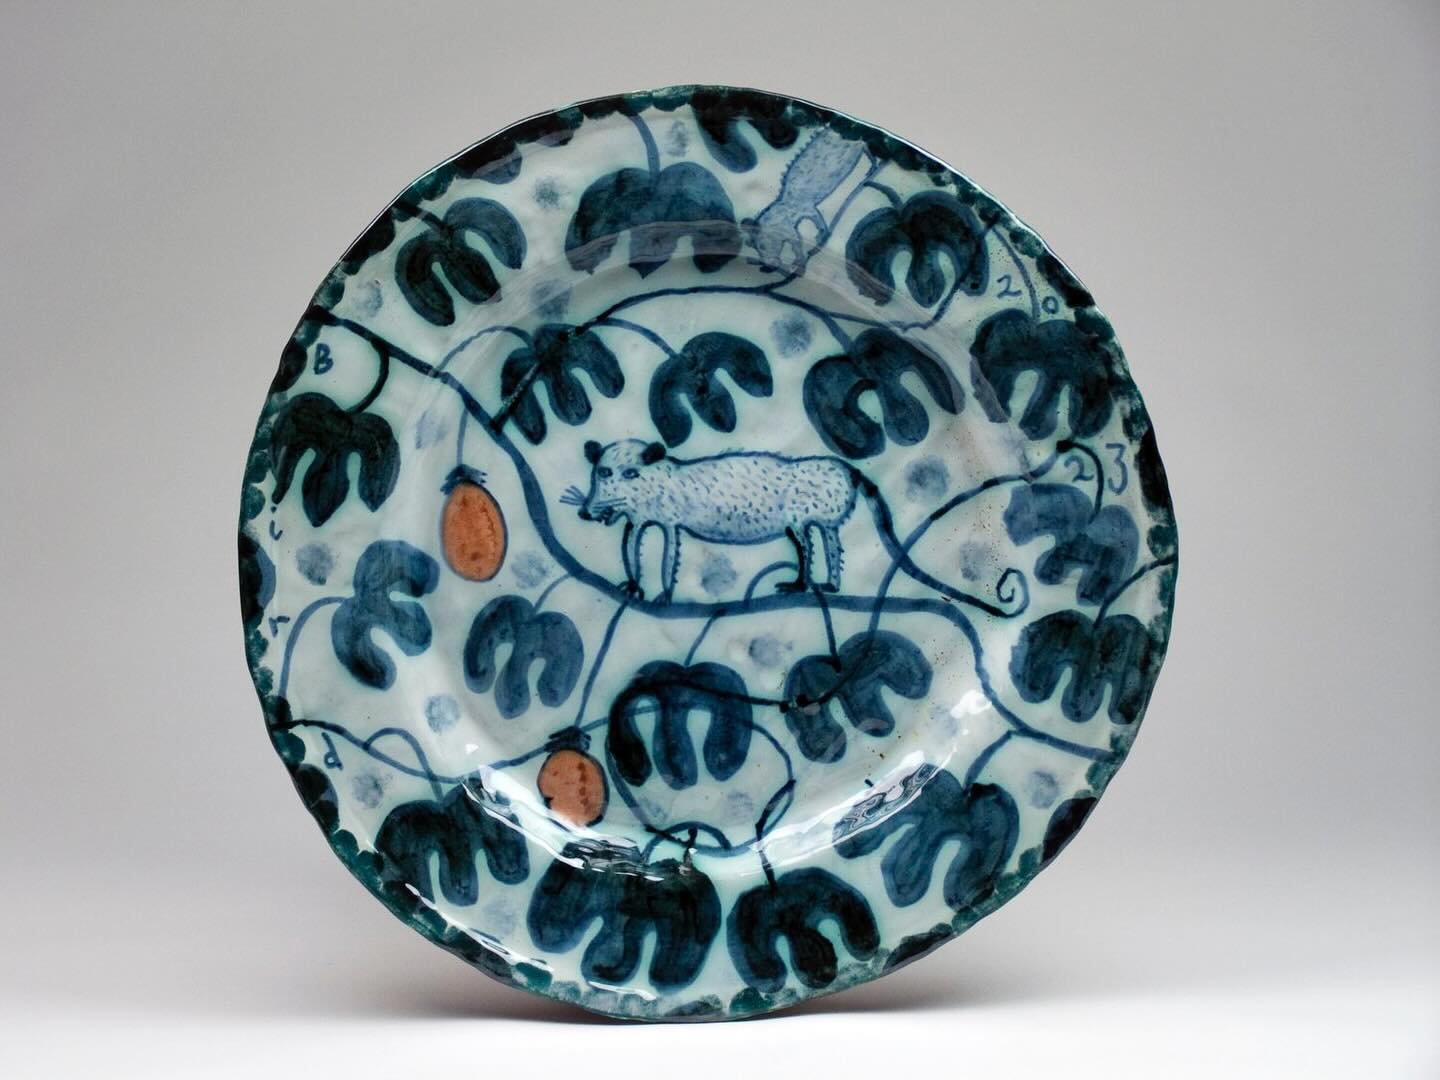 UPCOMING SHORT COURSE: INTERMEDIATE CERAMICS with STEPHEN BIRD 

This course is designed for those students with some previous ceramic experience who wish to expand and develop their hand building skills and hone their painting and glazing techniques